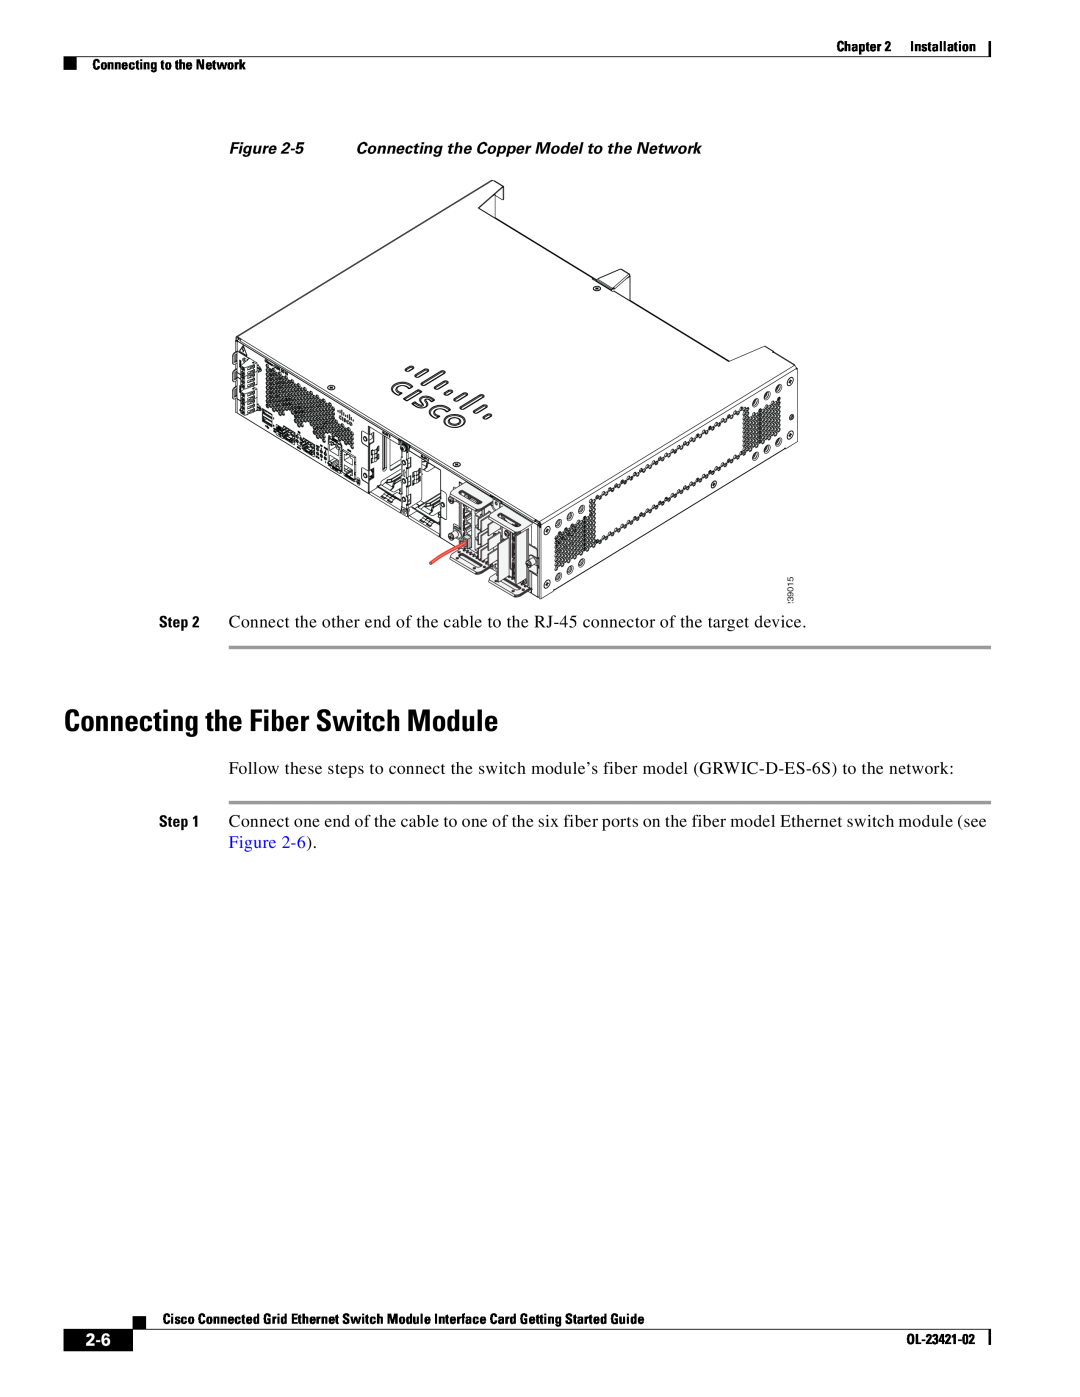 Cisco Systems OL-23421-02 manual Connecting the Fiber Switch Module, 5 Connecting the Copper Model to the Network 